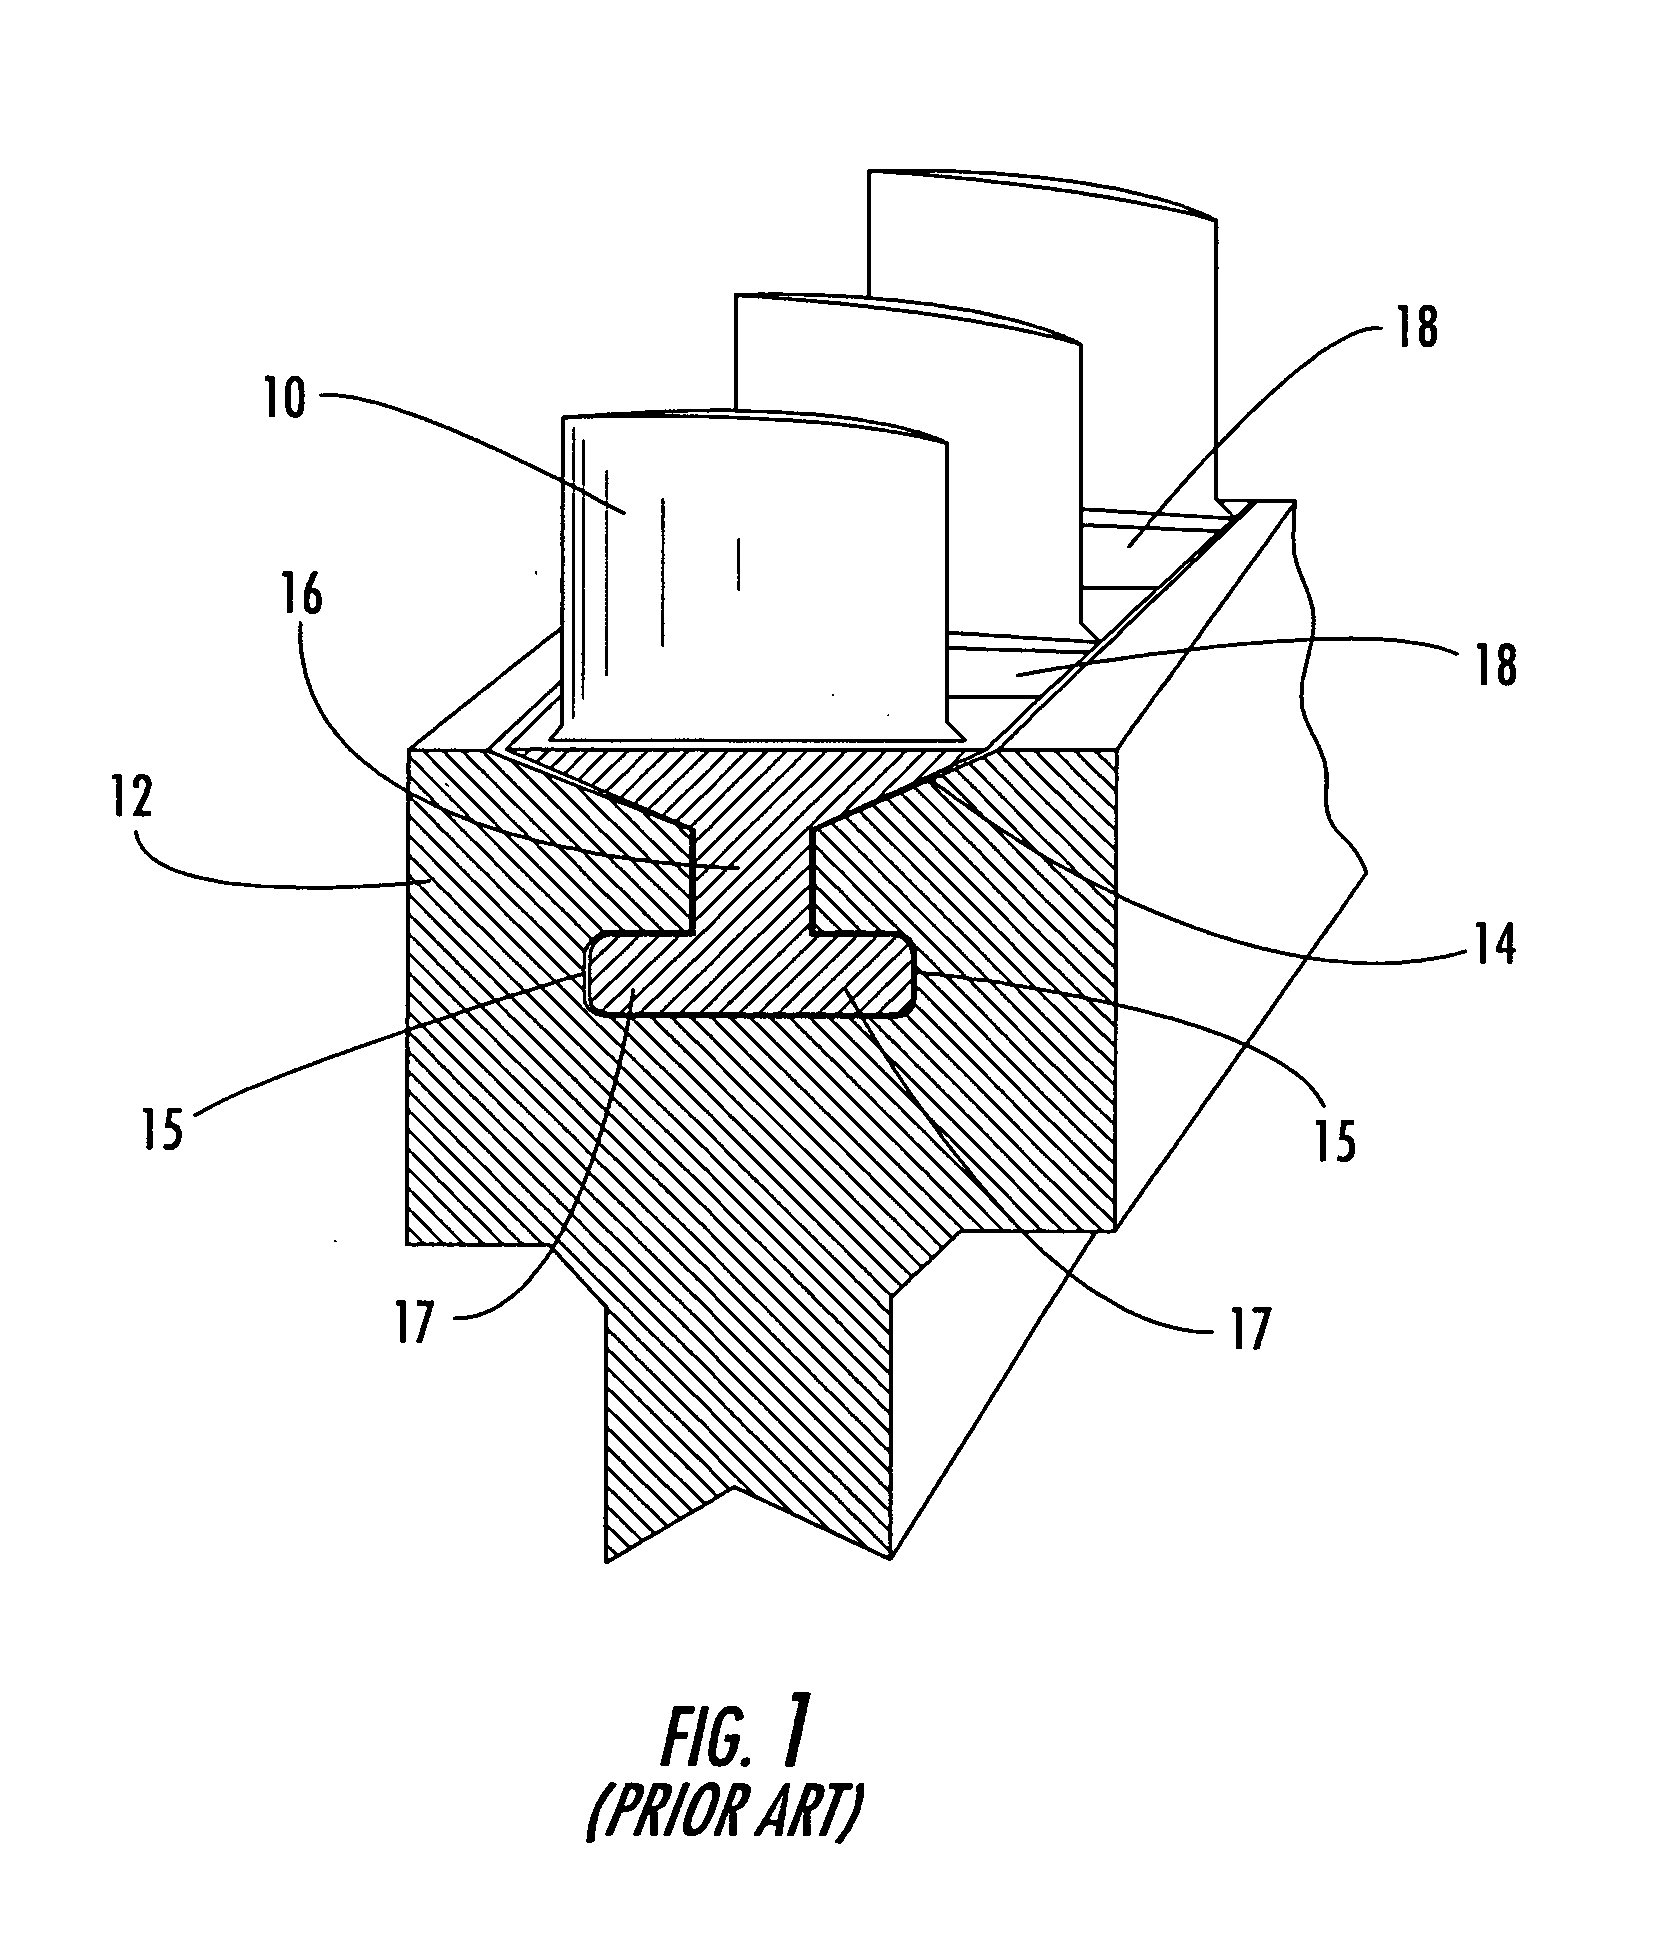 Locking spacer assembly for slotted turbine component